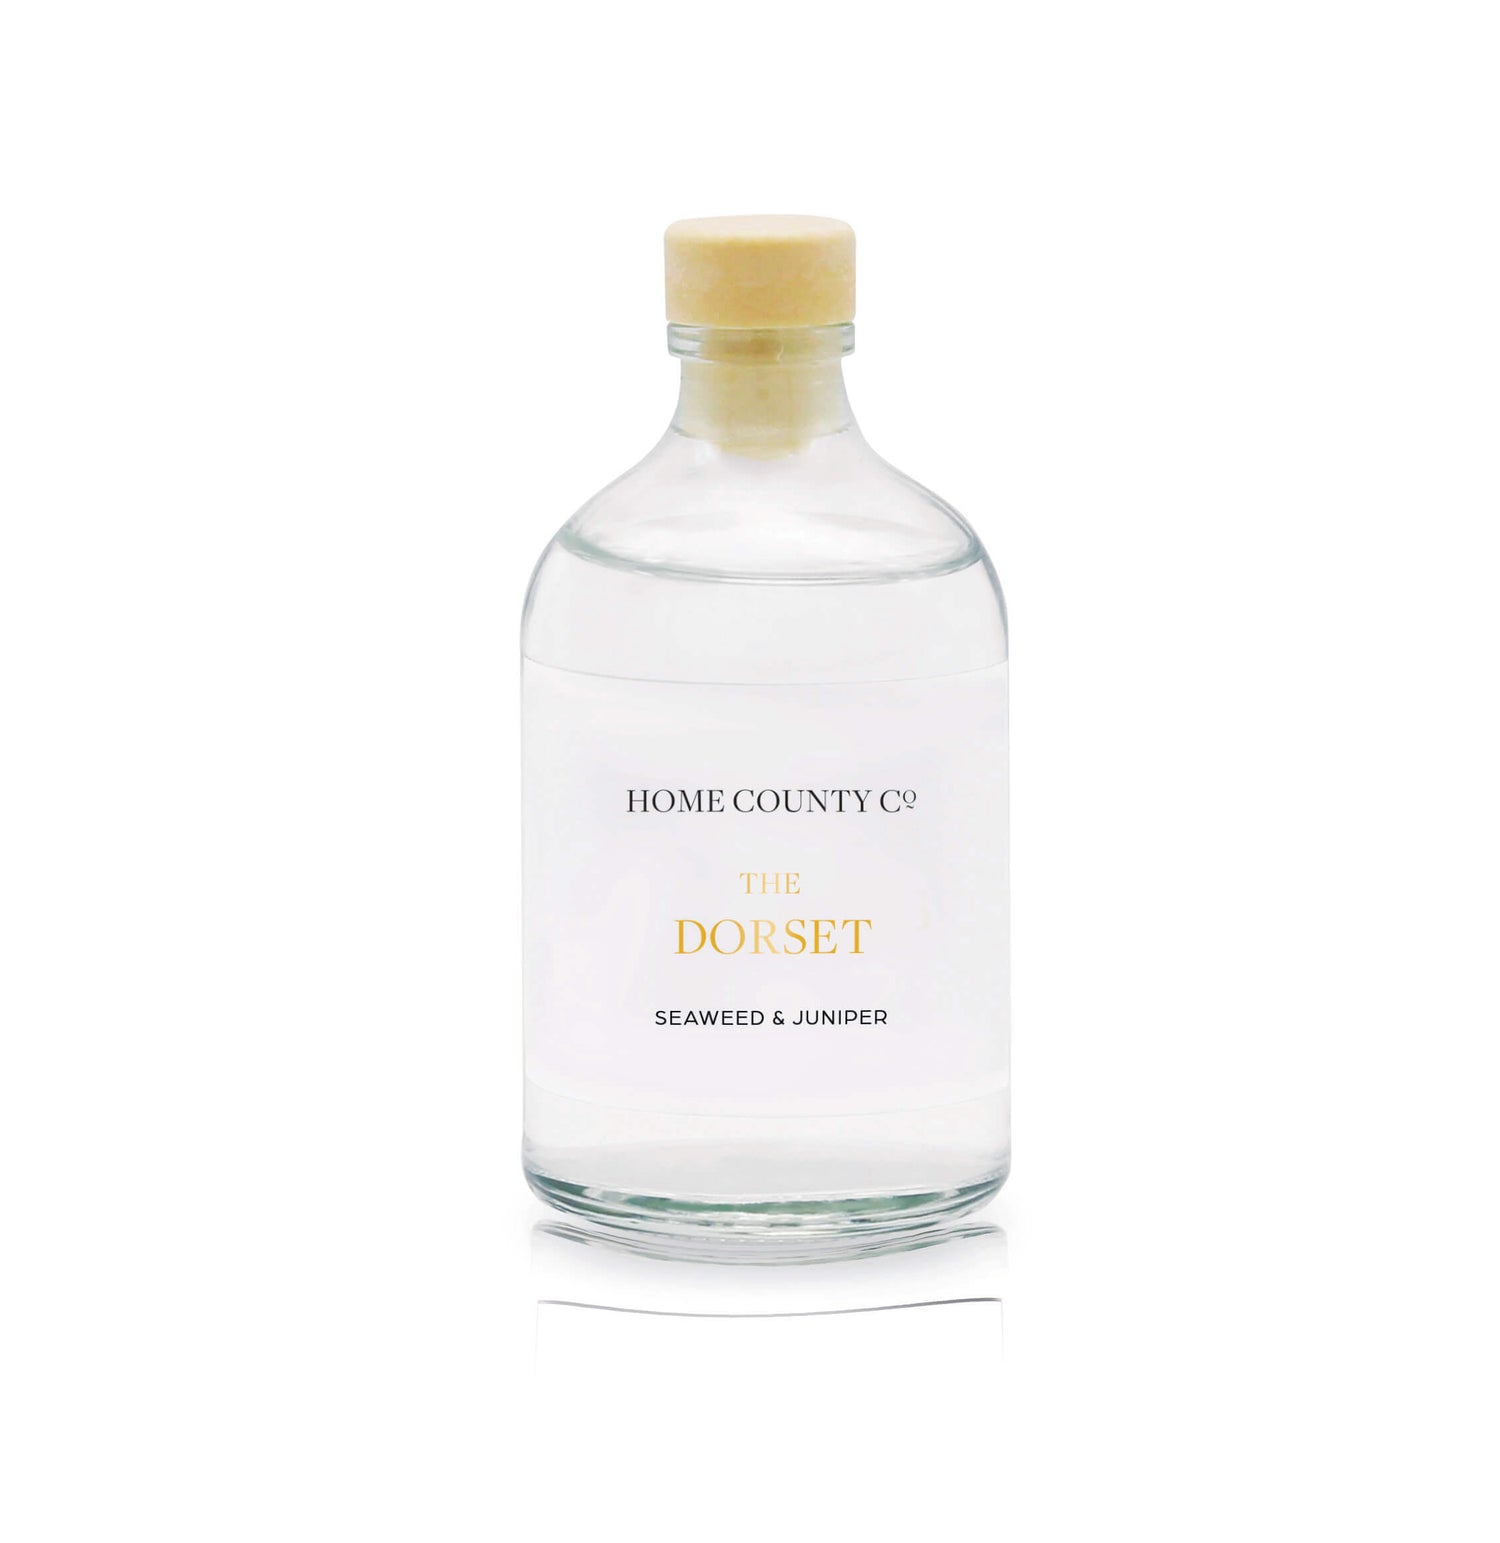 A seaweed and juniper reed diffuser refill is shown in a recyclable glass bottle